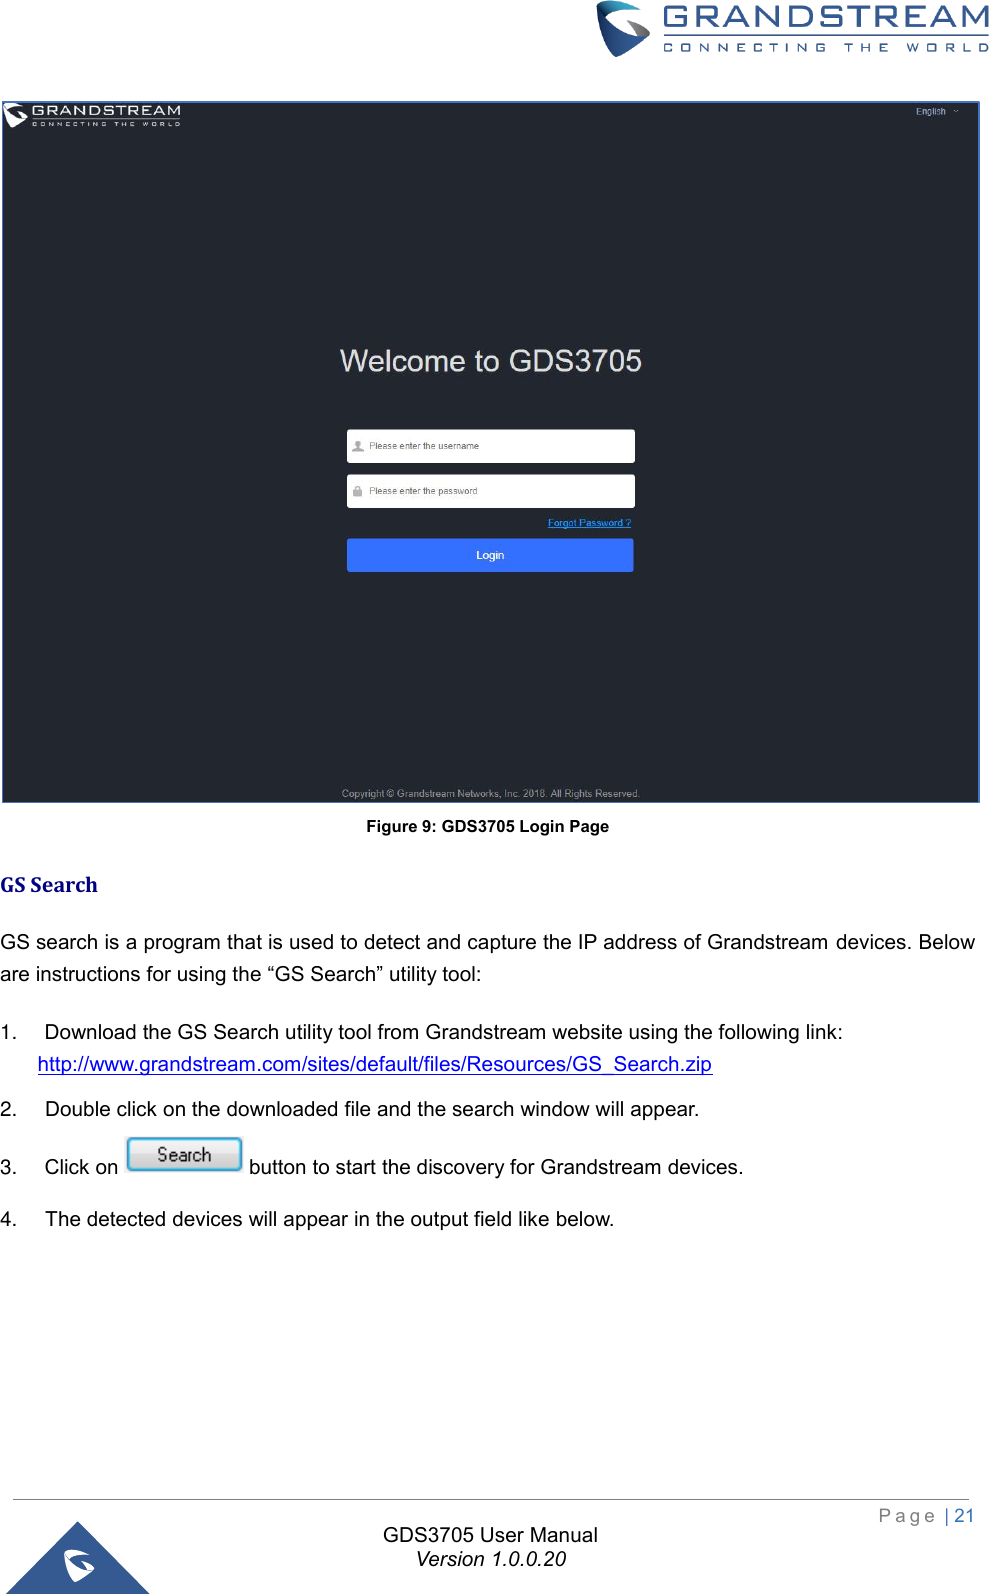                                                                         P a g e  | 21  GDS3705 User Manual Version 1.0.0.20  Figure 9: GDS3705 Login Page GS Search  GS search is a program that is used to detect and capture the IP address of Grandstream devices. Below are instructions for using the “GS Search” utility tool: 1. Download the GS Search utility tool from Grandstream website using the following link:  http://www.grandstream.com/sites/default/files/Resources/GS_Search.zip 2. Double click on the downloaded file and the search window will appear. 3. Click on   button to start the discovery for Grandstream devices. 4. The detected devices will appear in the output field like below.   